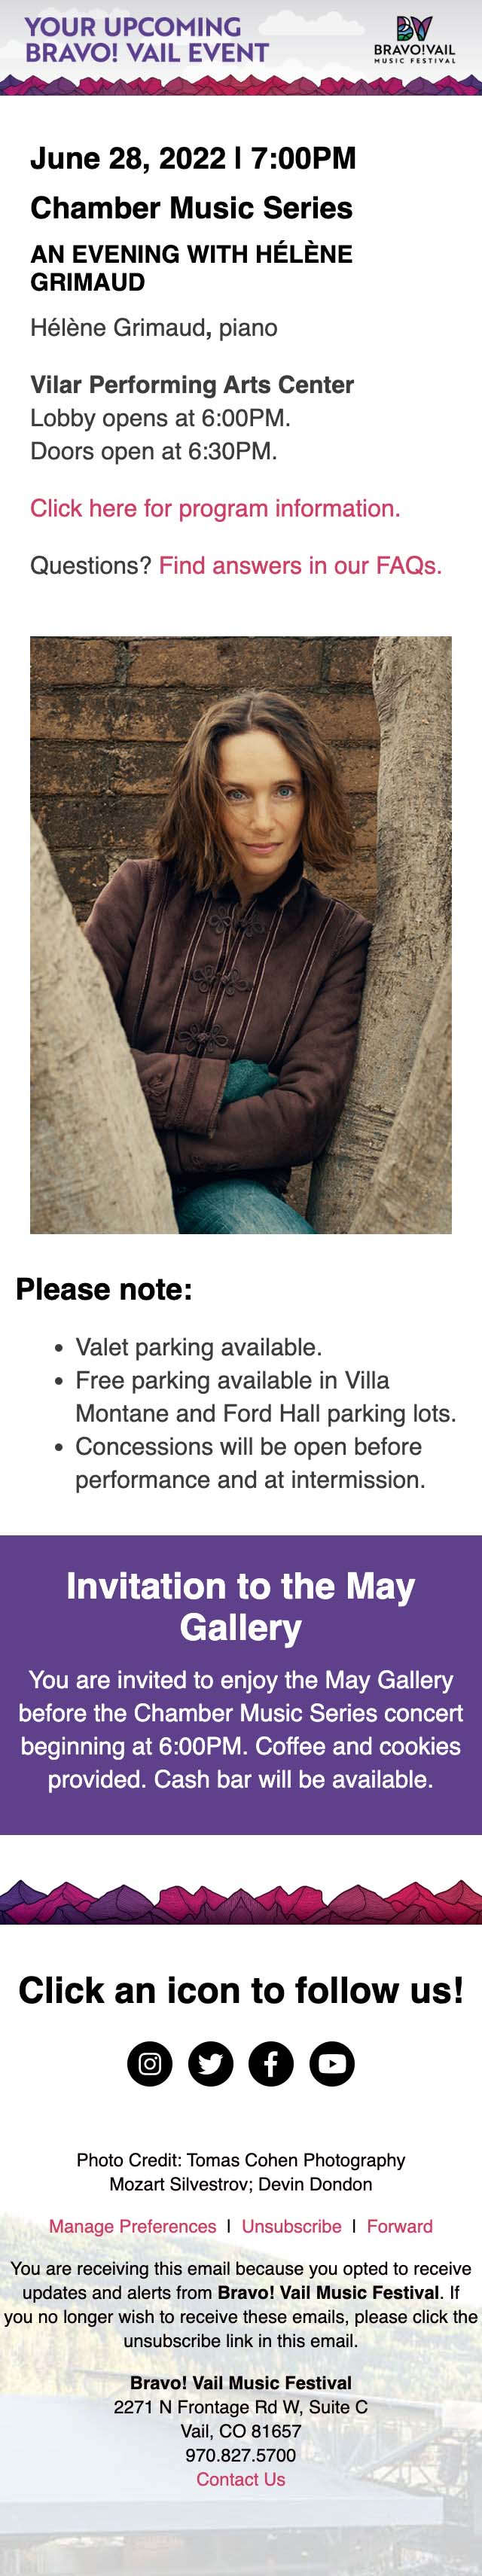 Your Bravo! Vail June 28 Event Information - mobile view